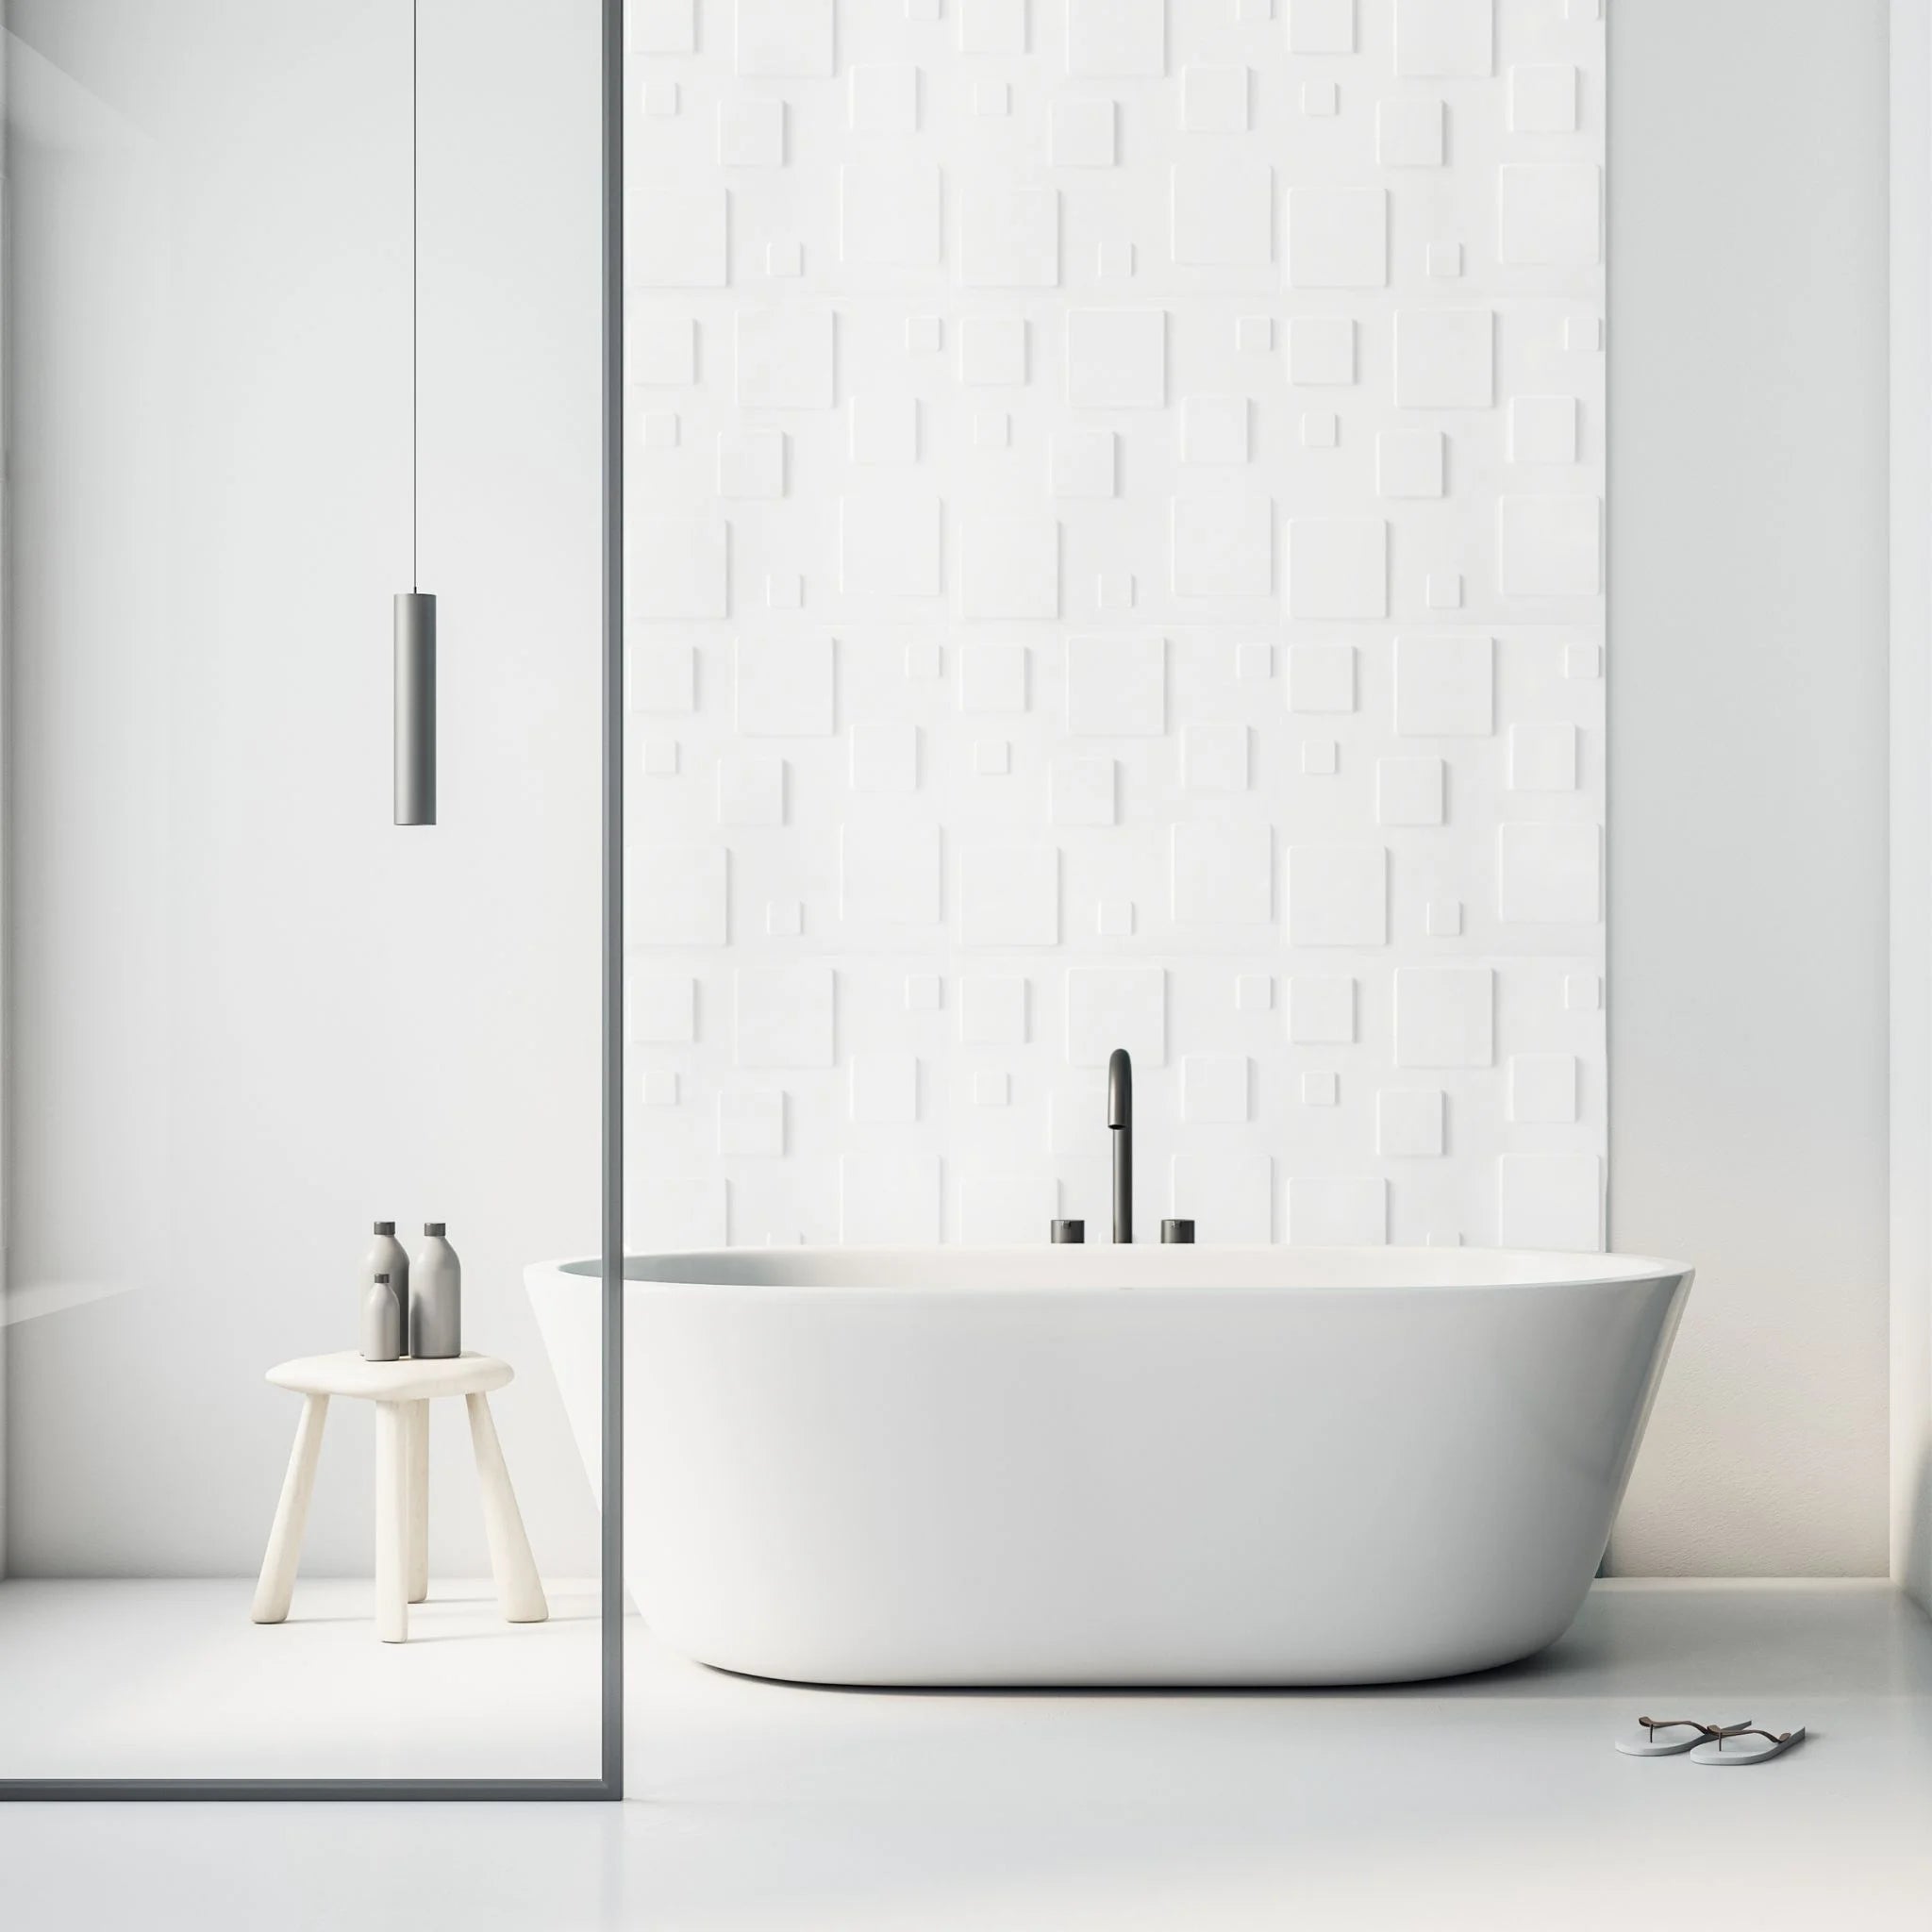 Bathroom with white geometric-patterned PVC wall panels and modern furniture